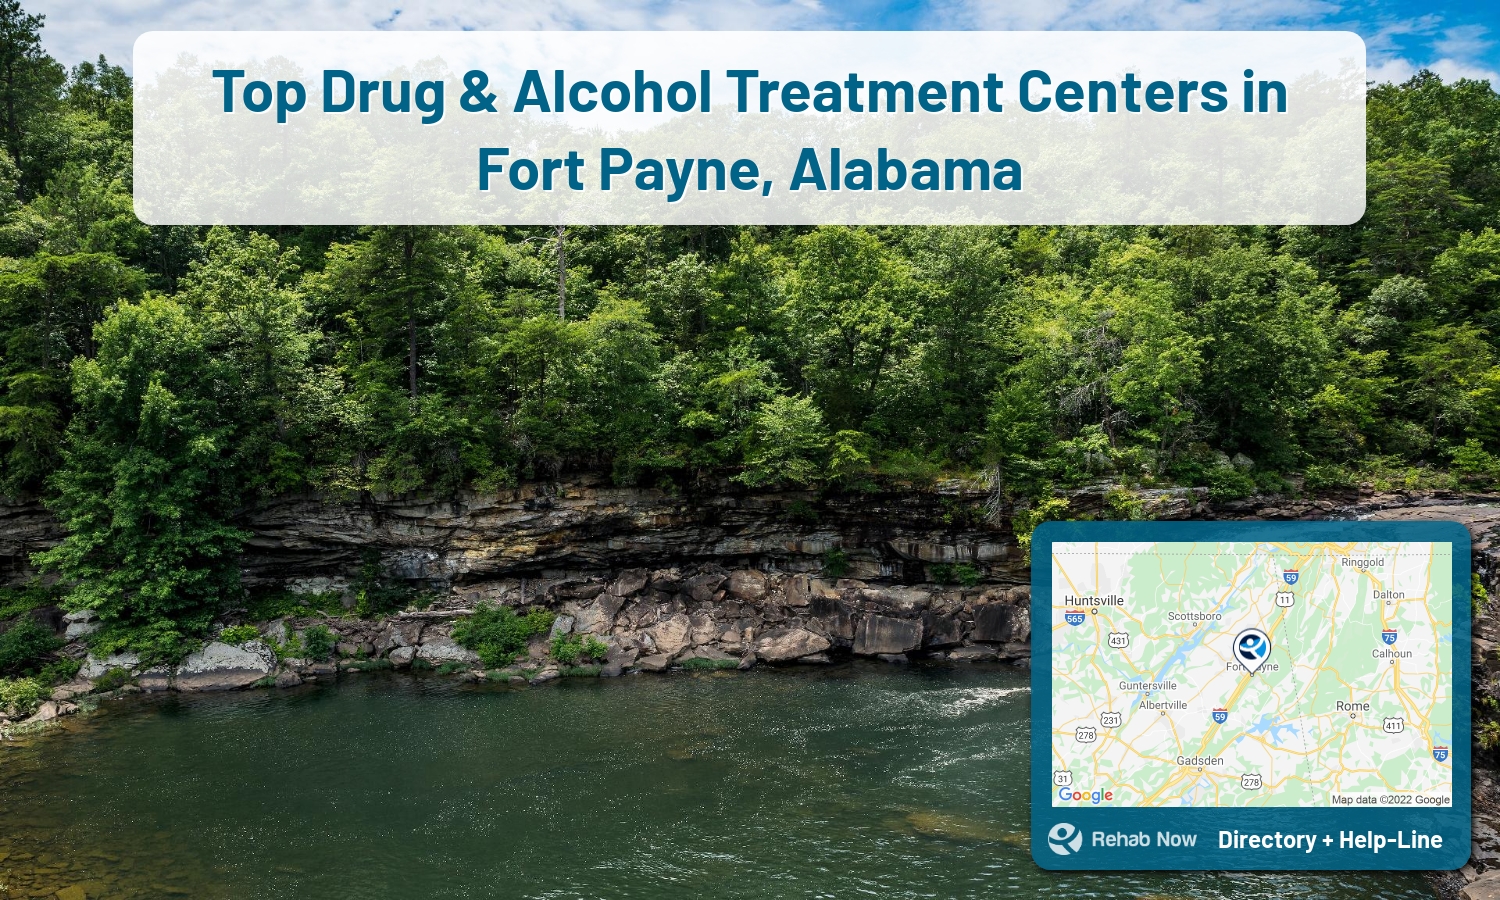 Ready to pick a rehab center in Fort Payne? Get off alcohol, opiates, and other drugs, by selecting top drug rehab centers in Alabama